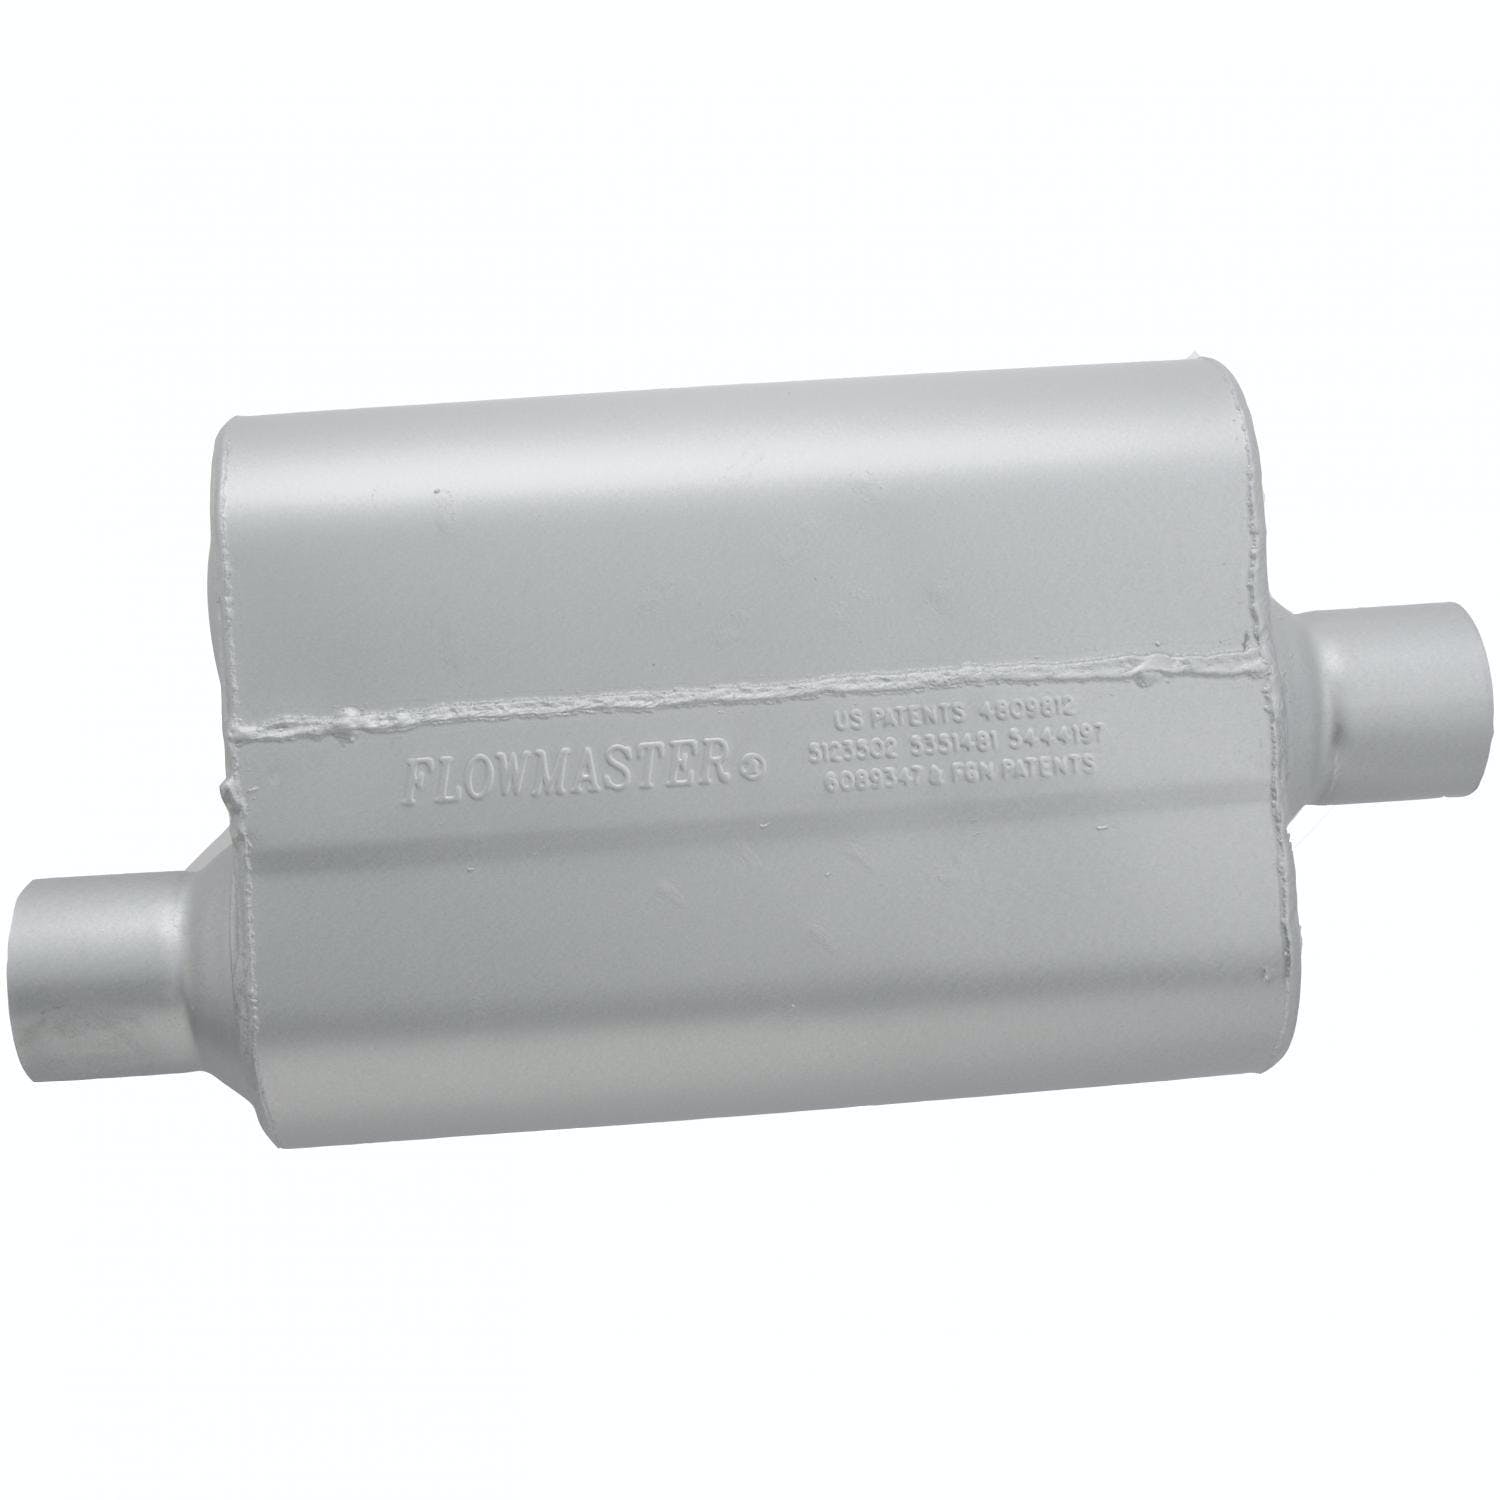 Flowmaster 942541 2.5 IN(O)/OUT(C) 40 SERIES DF